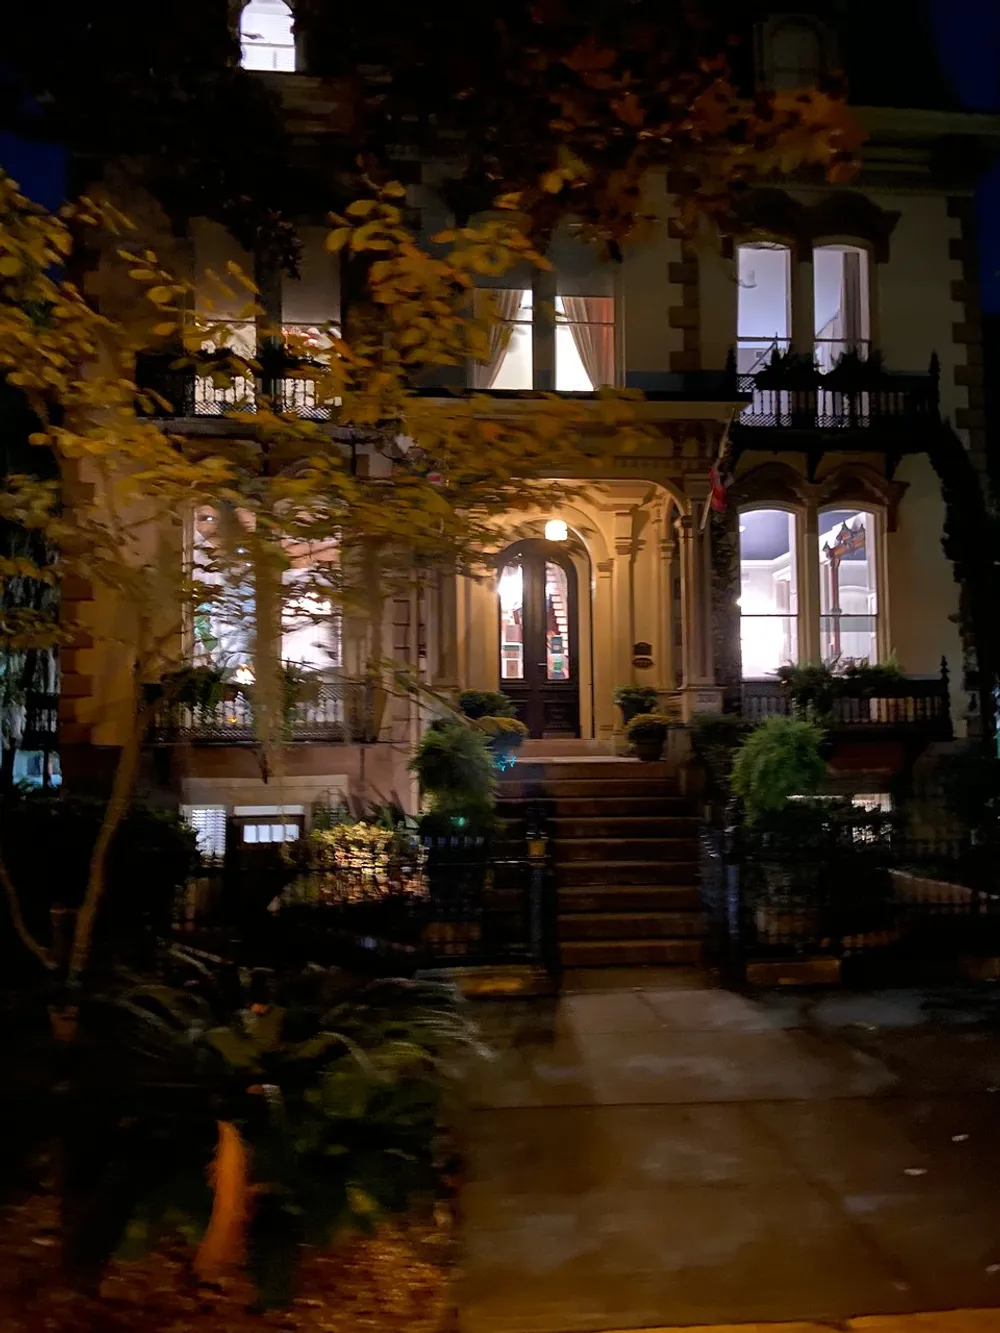 The image shows a warmly lit brownstone townhouse at night framed by foliage and featuring a classic stoop with iron railings